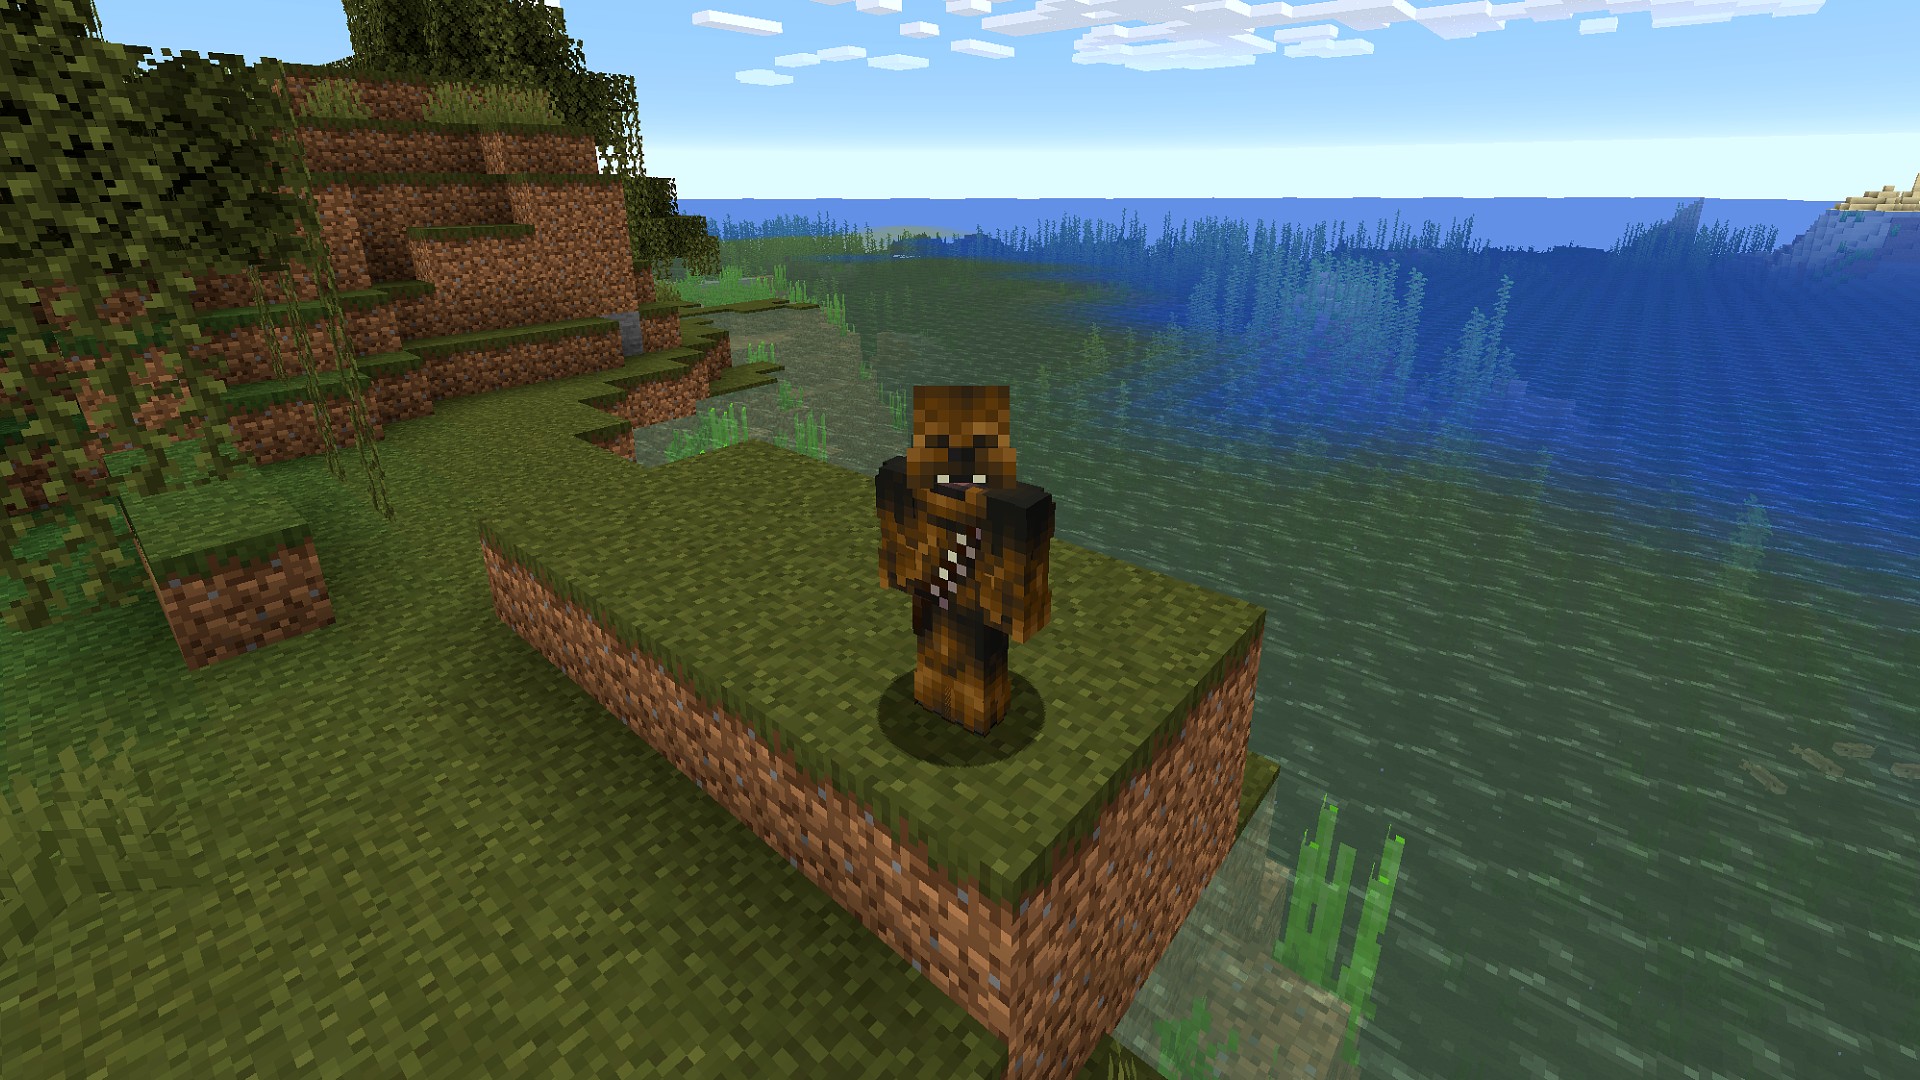 Minecraft skins: Darth Maul is standing in a field.